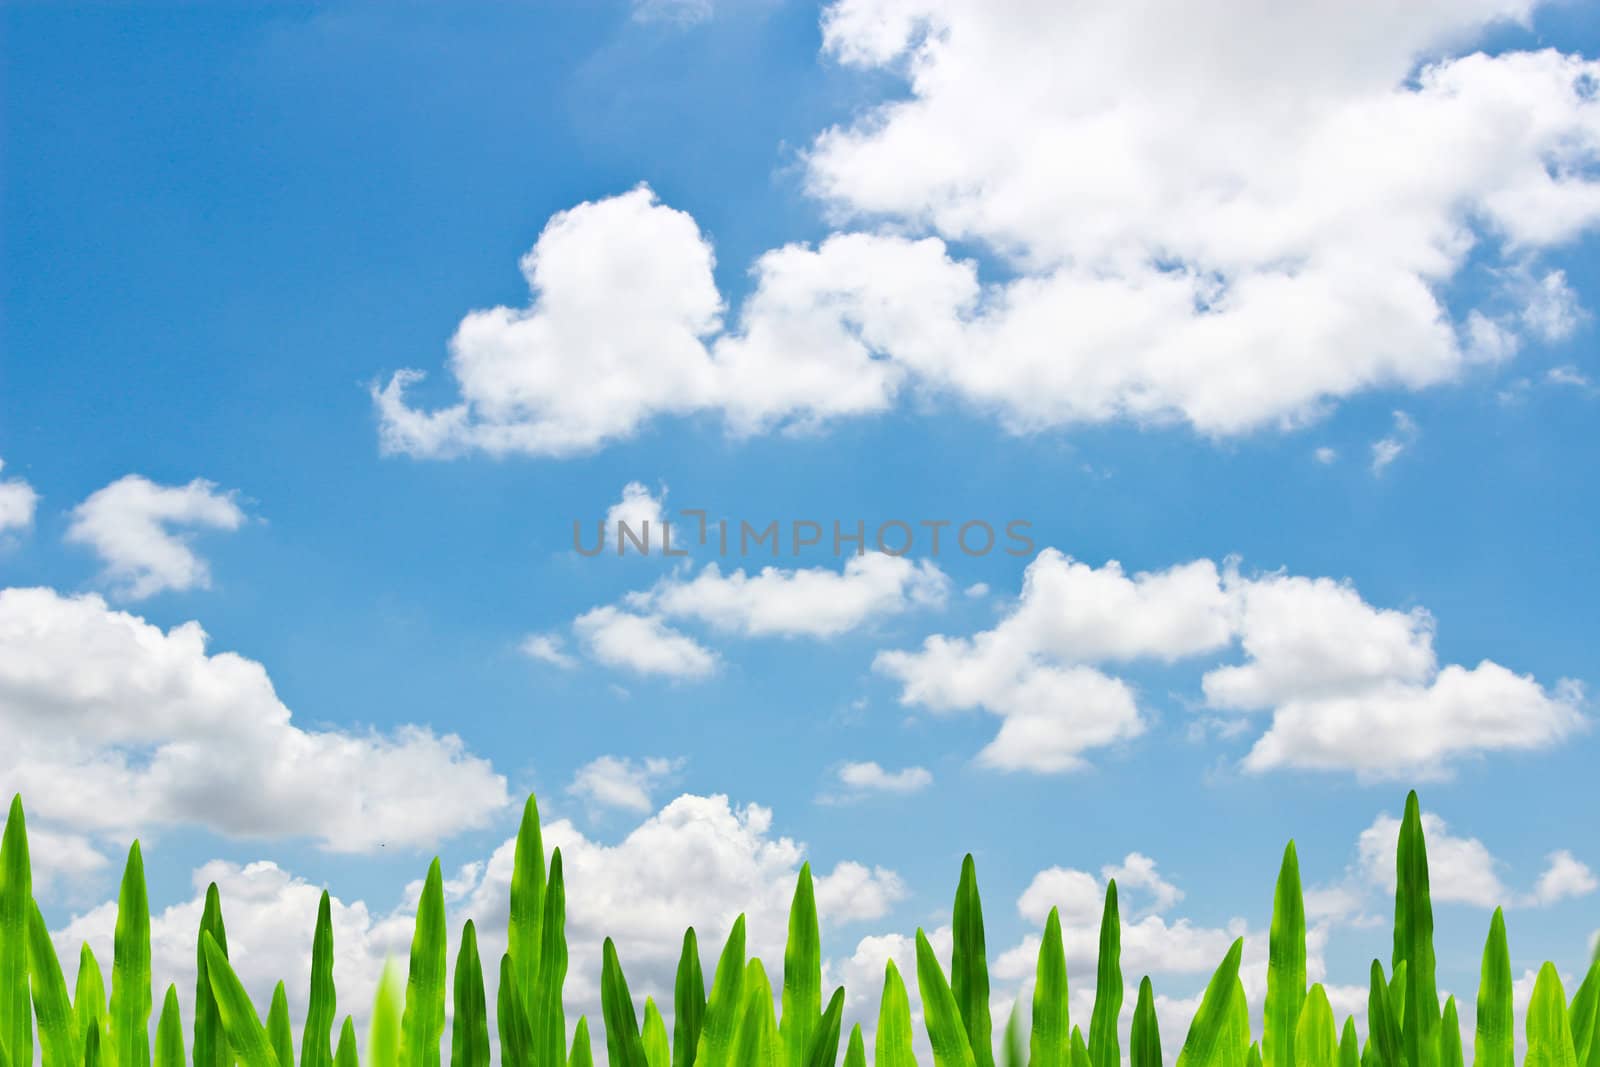 Green grass in blue sky with clouds. by bajita111122